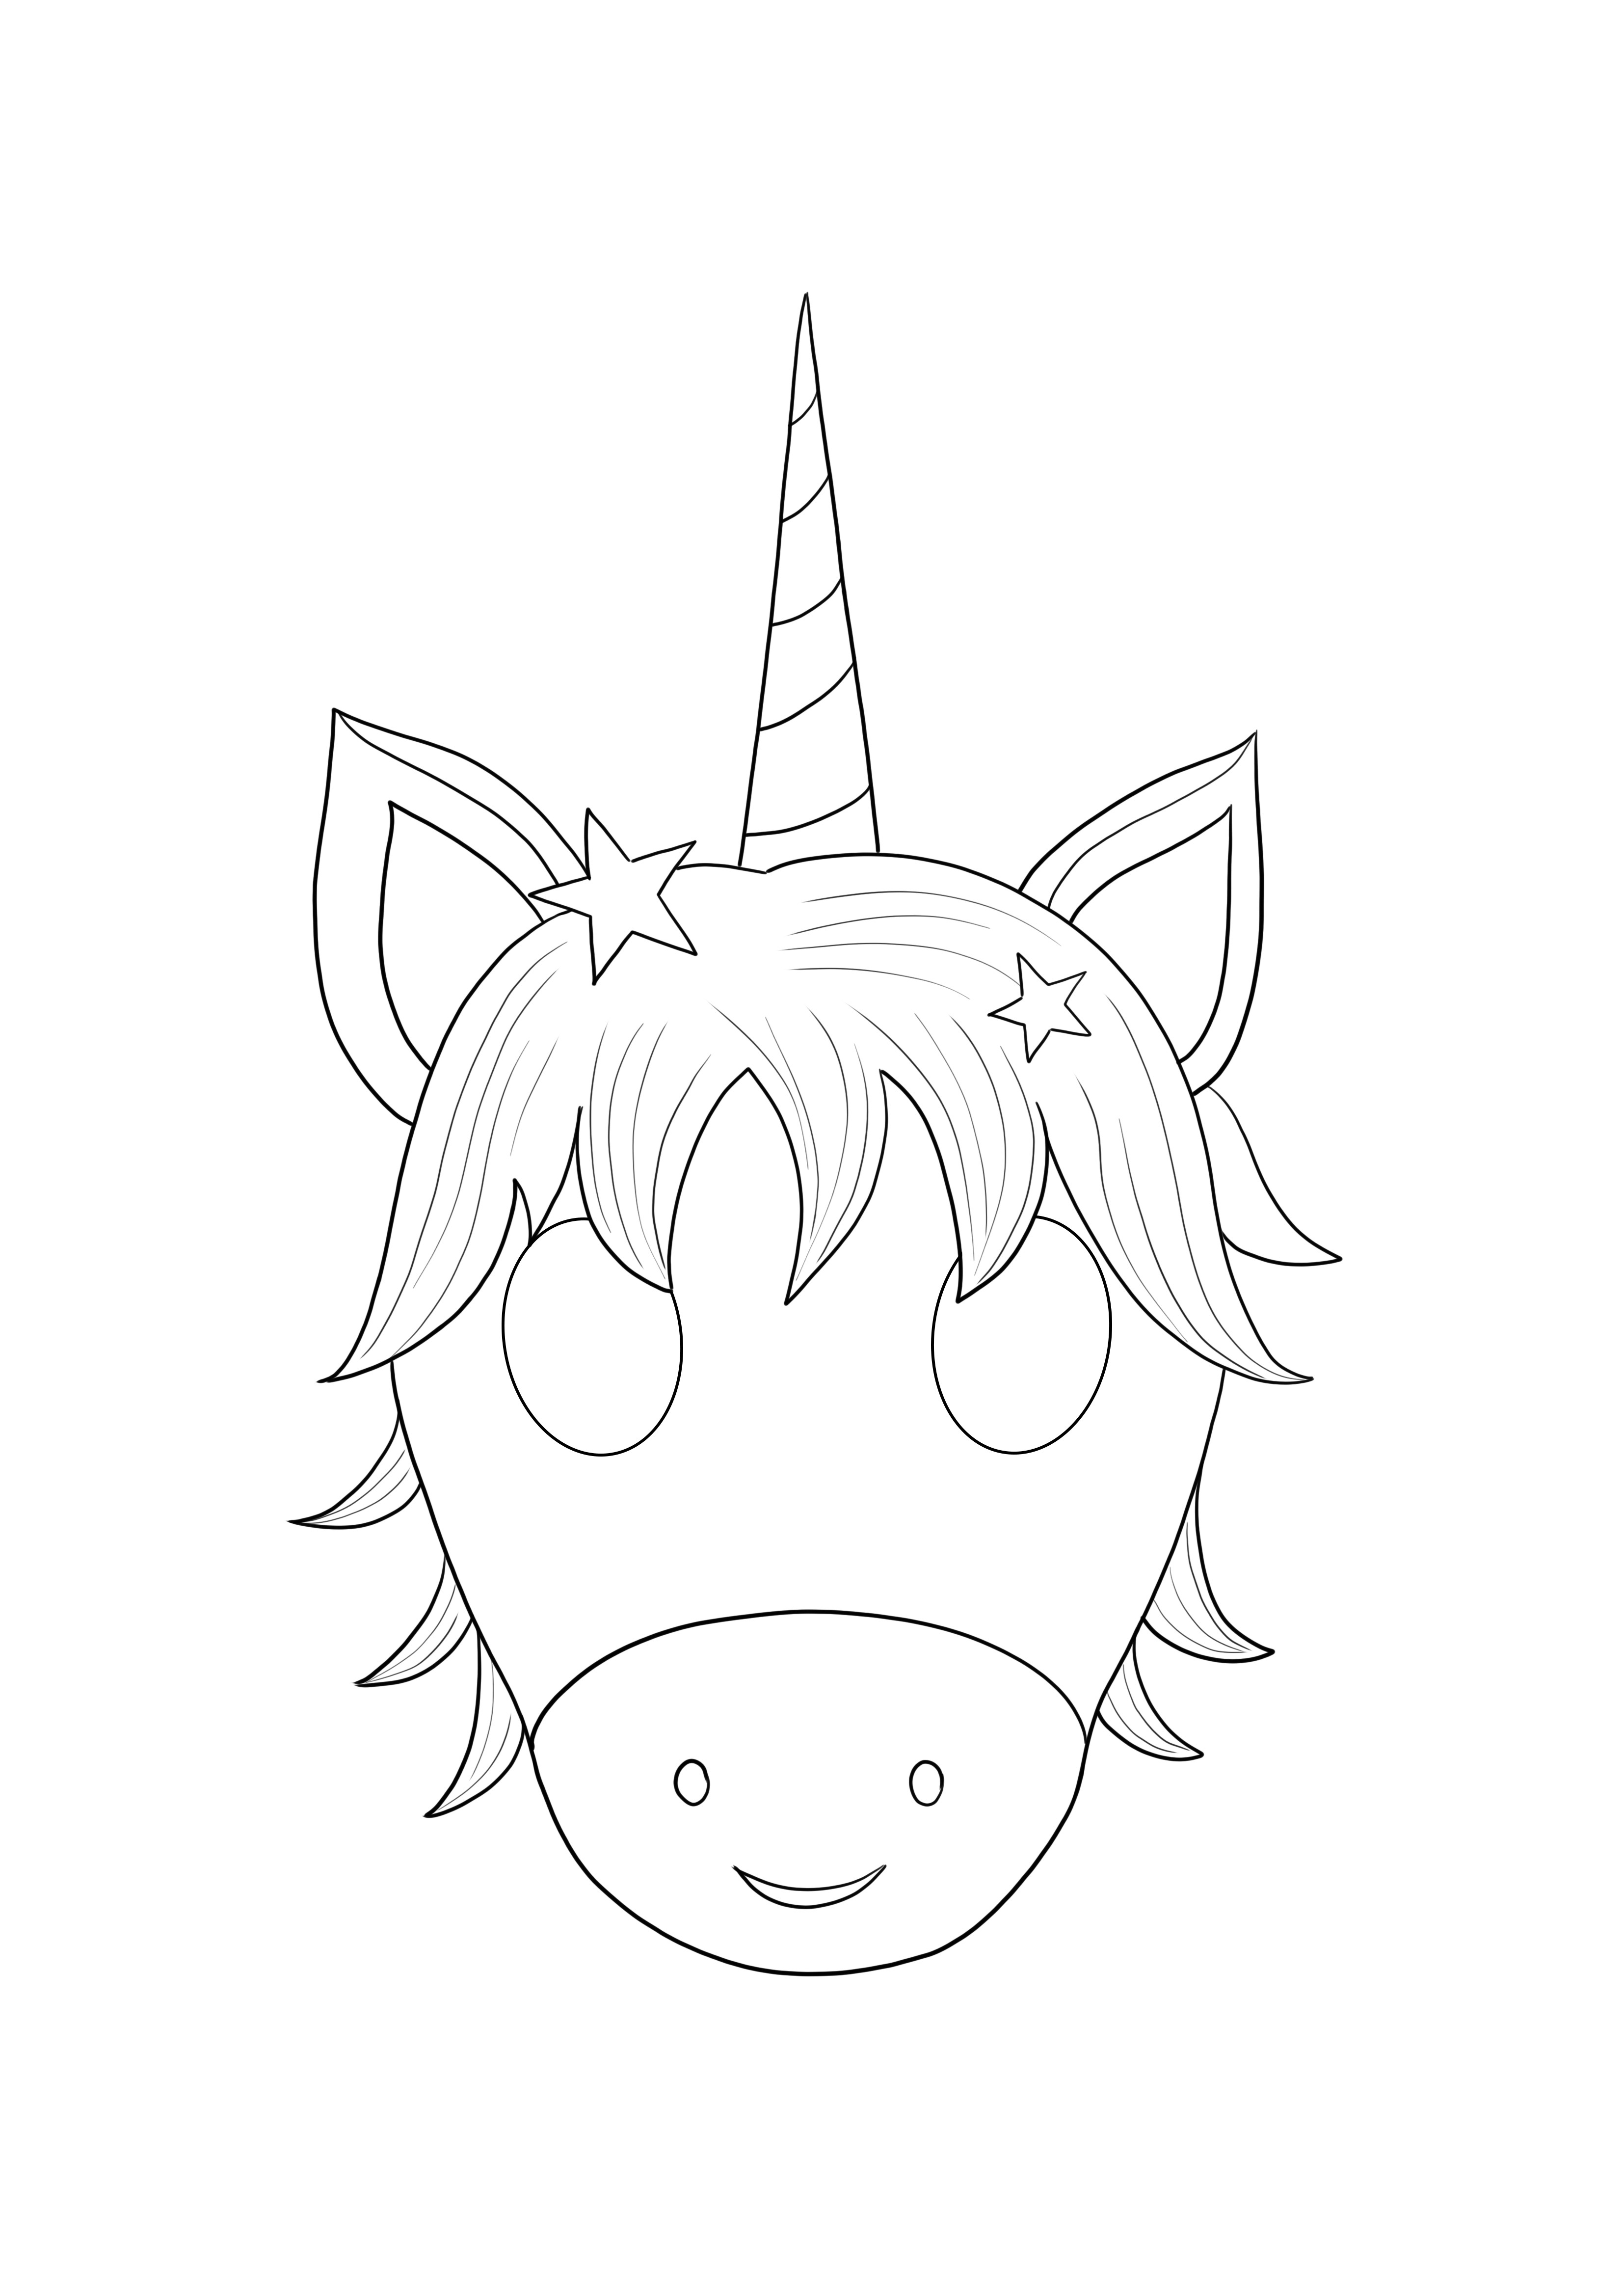 Unicorn Mask Coloring And Free Printing Image - Coloring Home